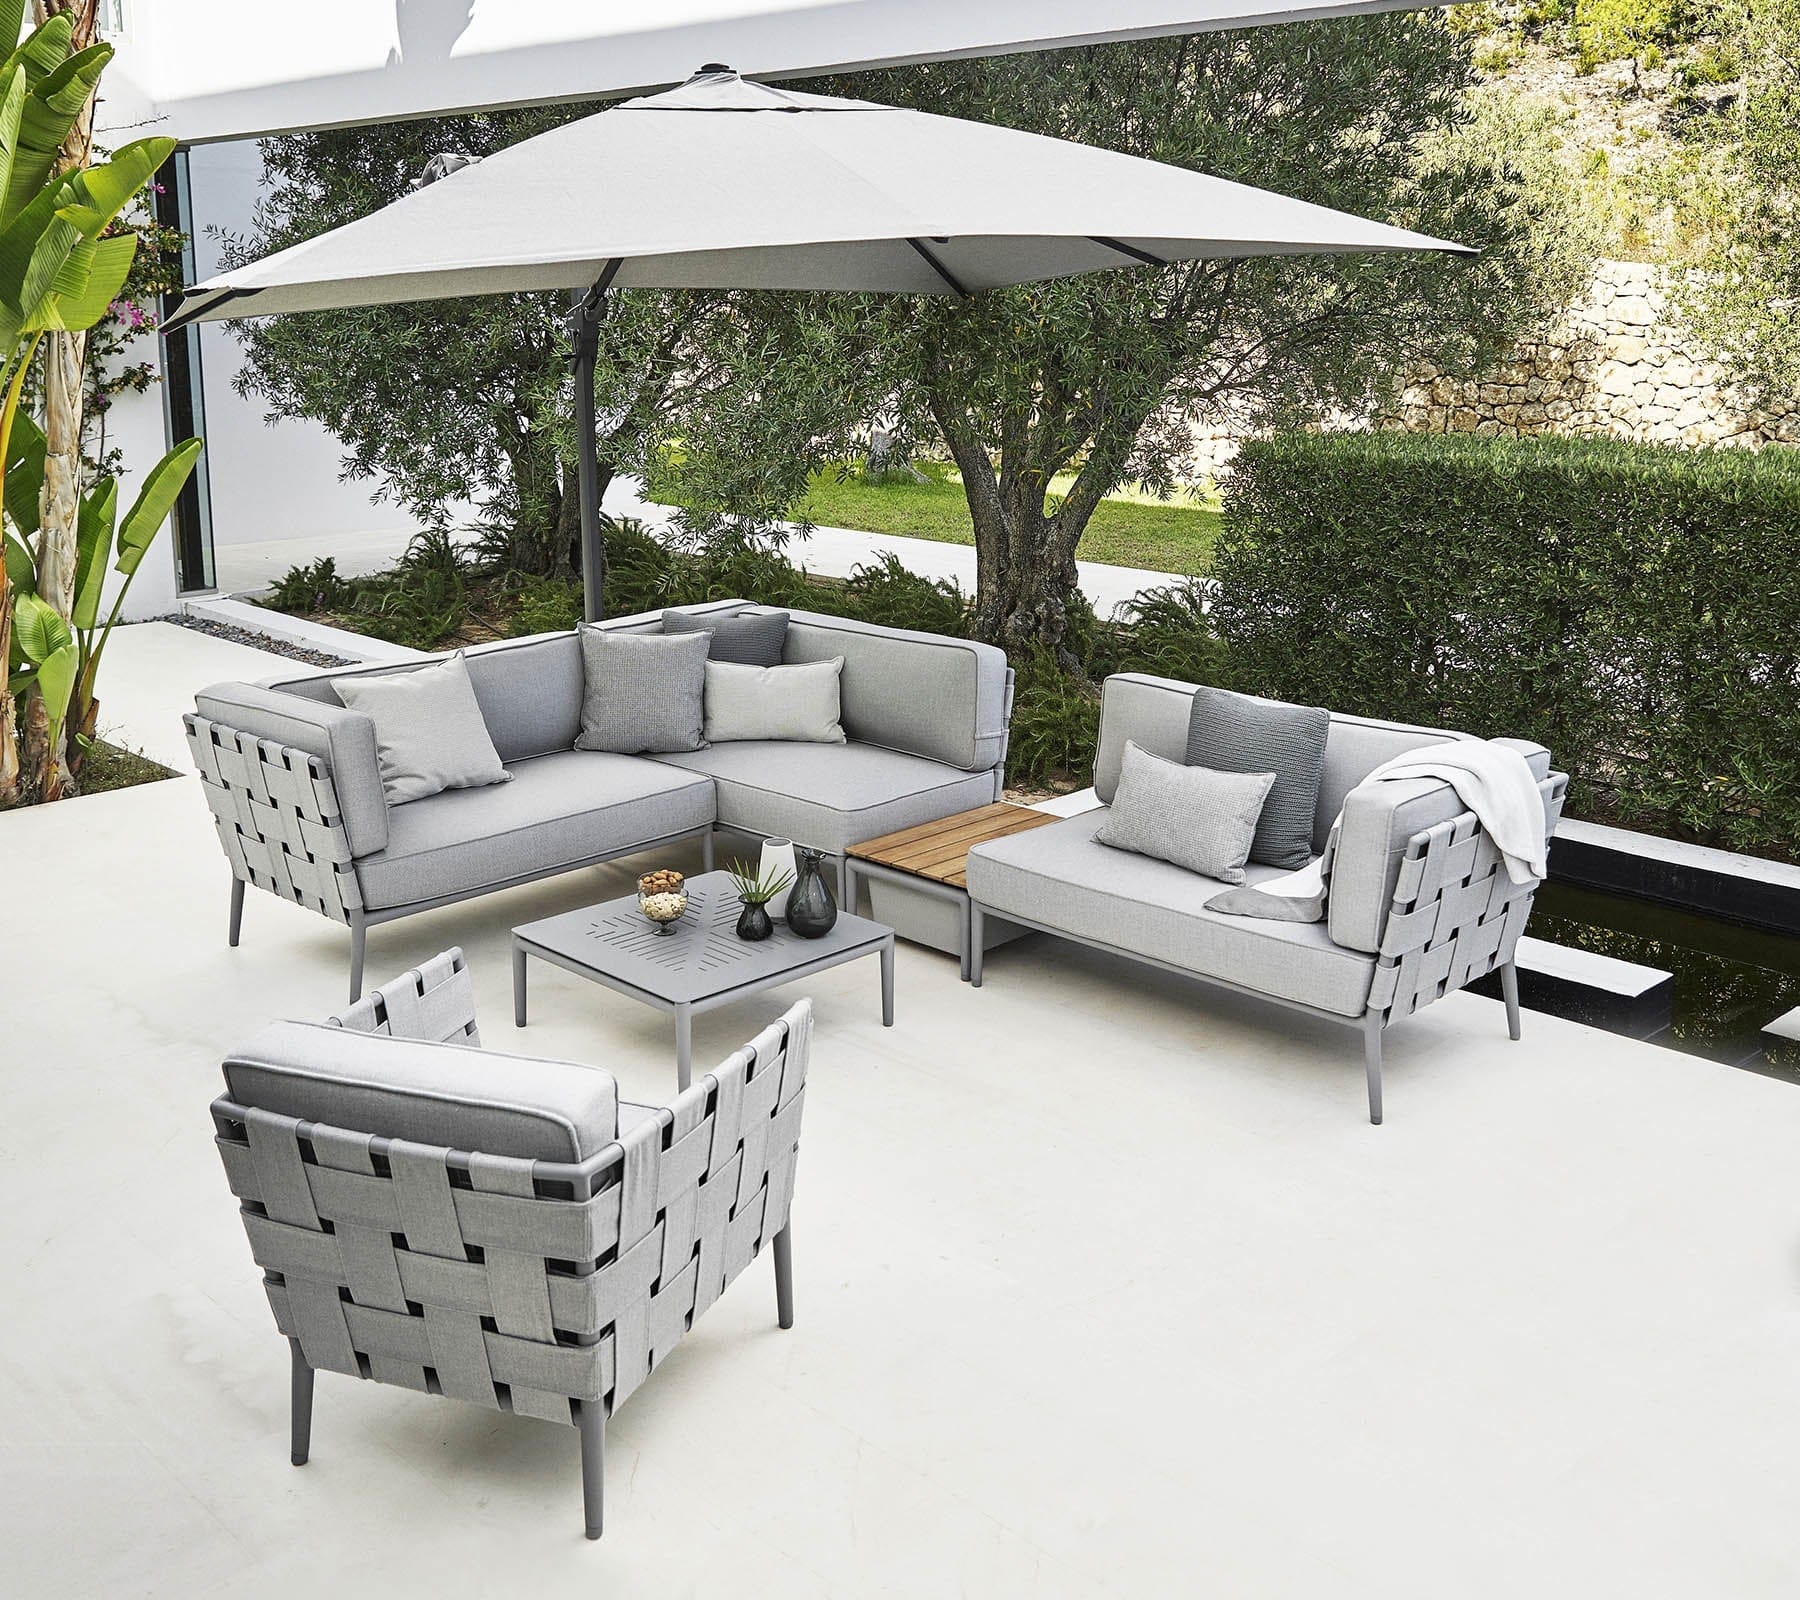 Boxhill's Conic Lounge Chair Light Grey lifestyle image with Conic Module Sofa, Conic Coffee Table, and Conic Box Outdoor Storage Table at Patio